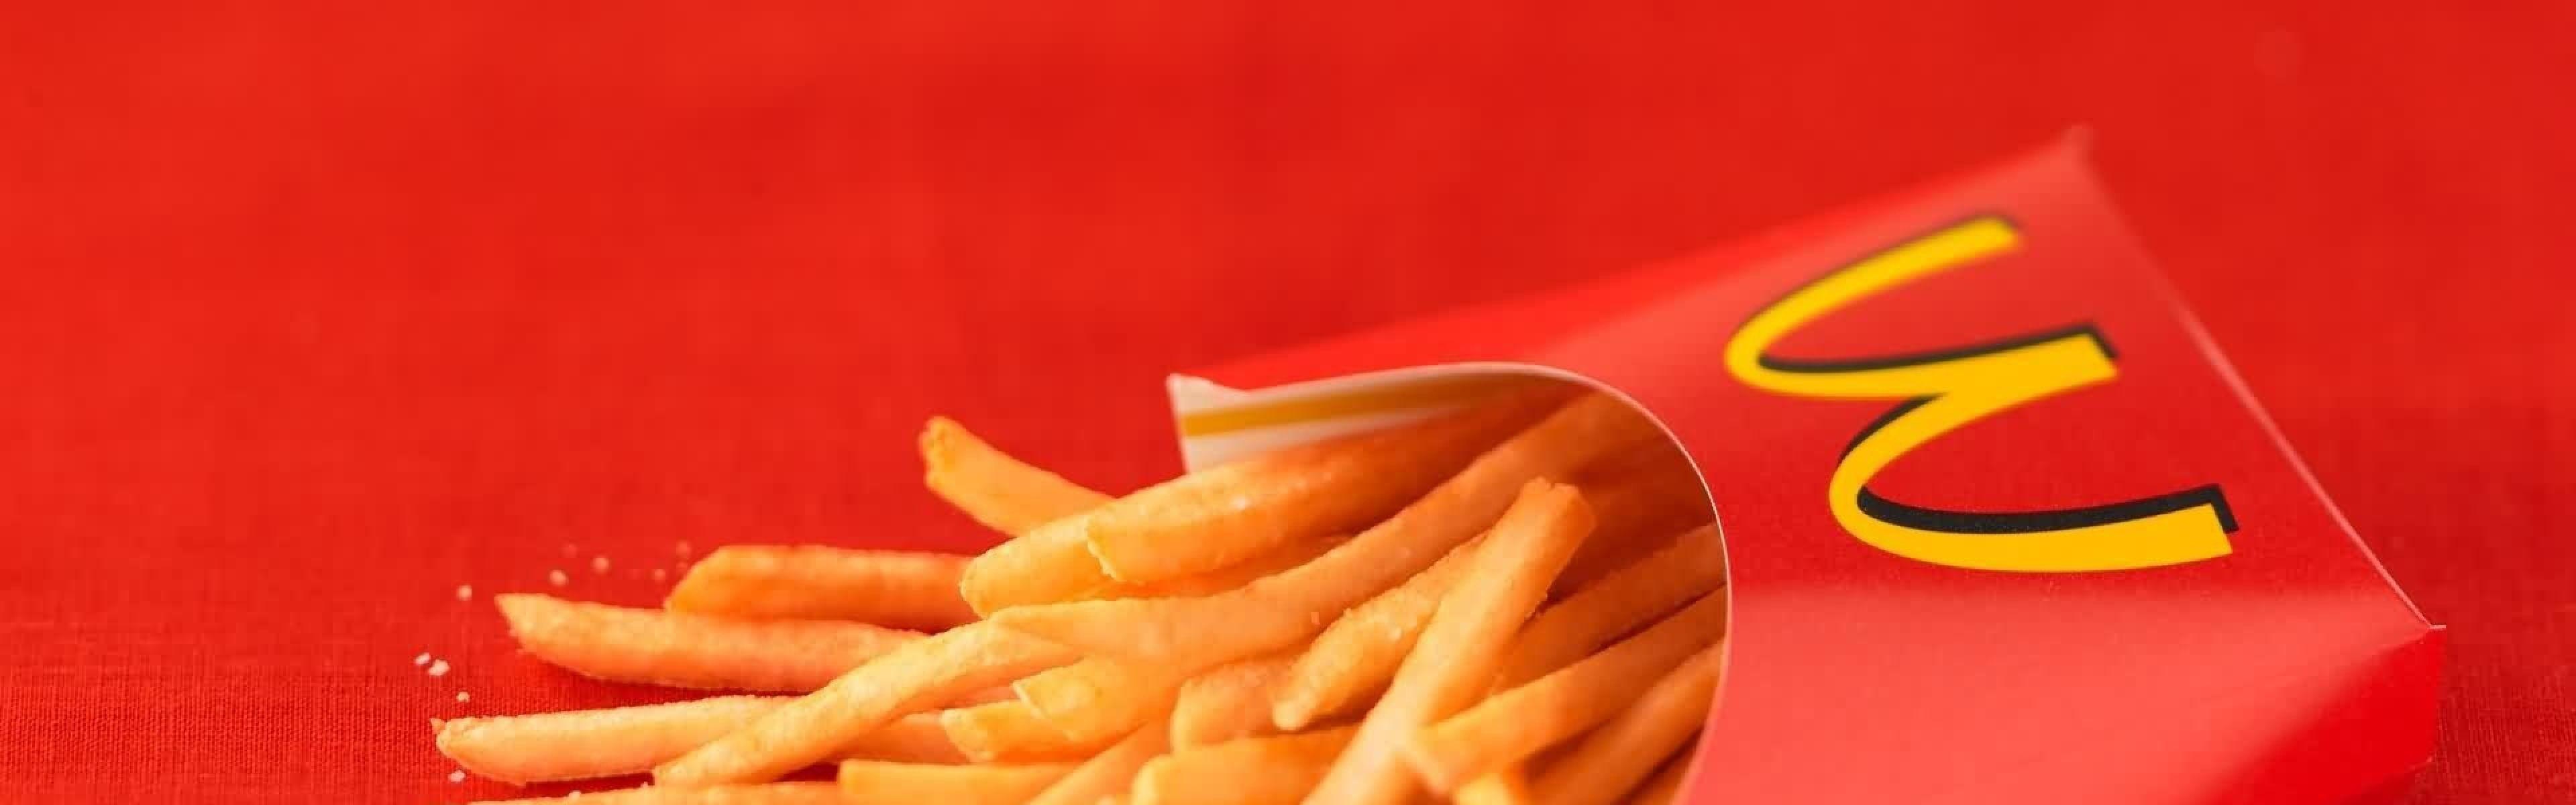 Download Wallpapers 3840x1200 Mcdonalds, French fries, Food, Fast